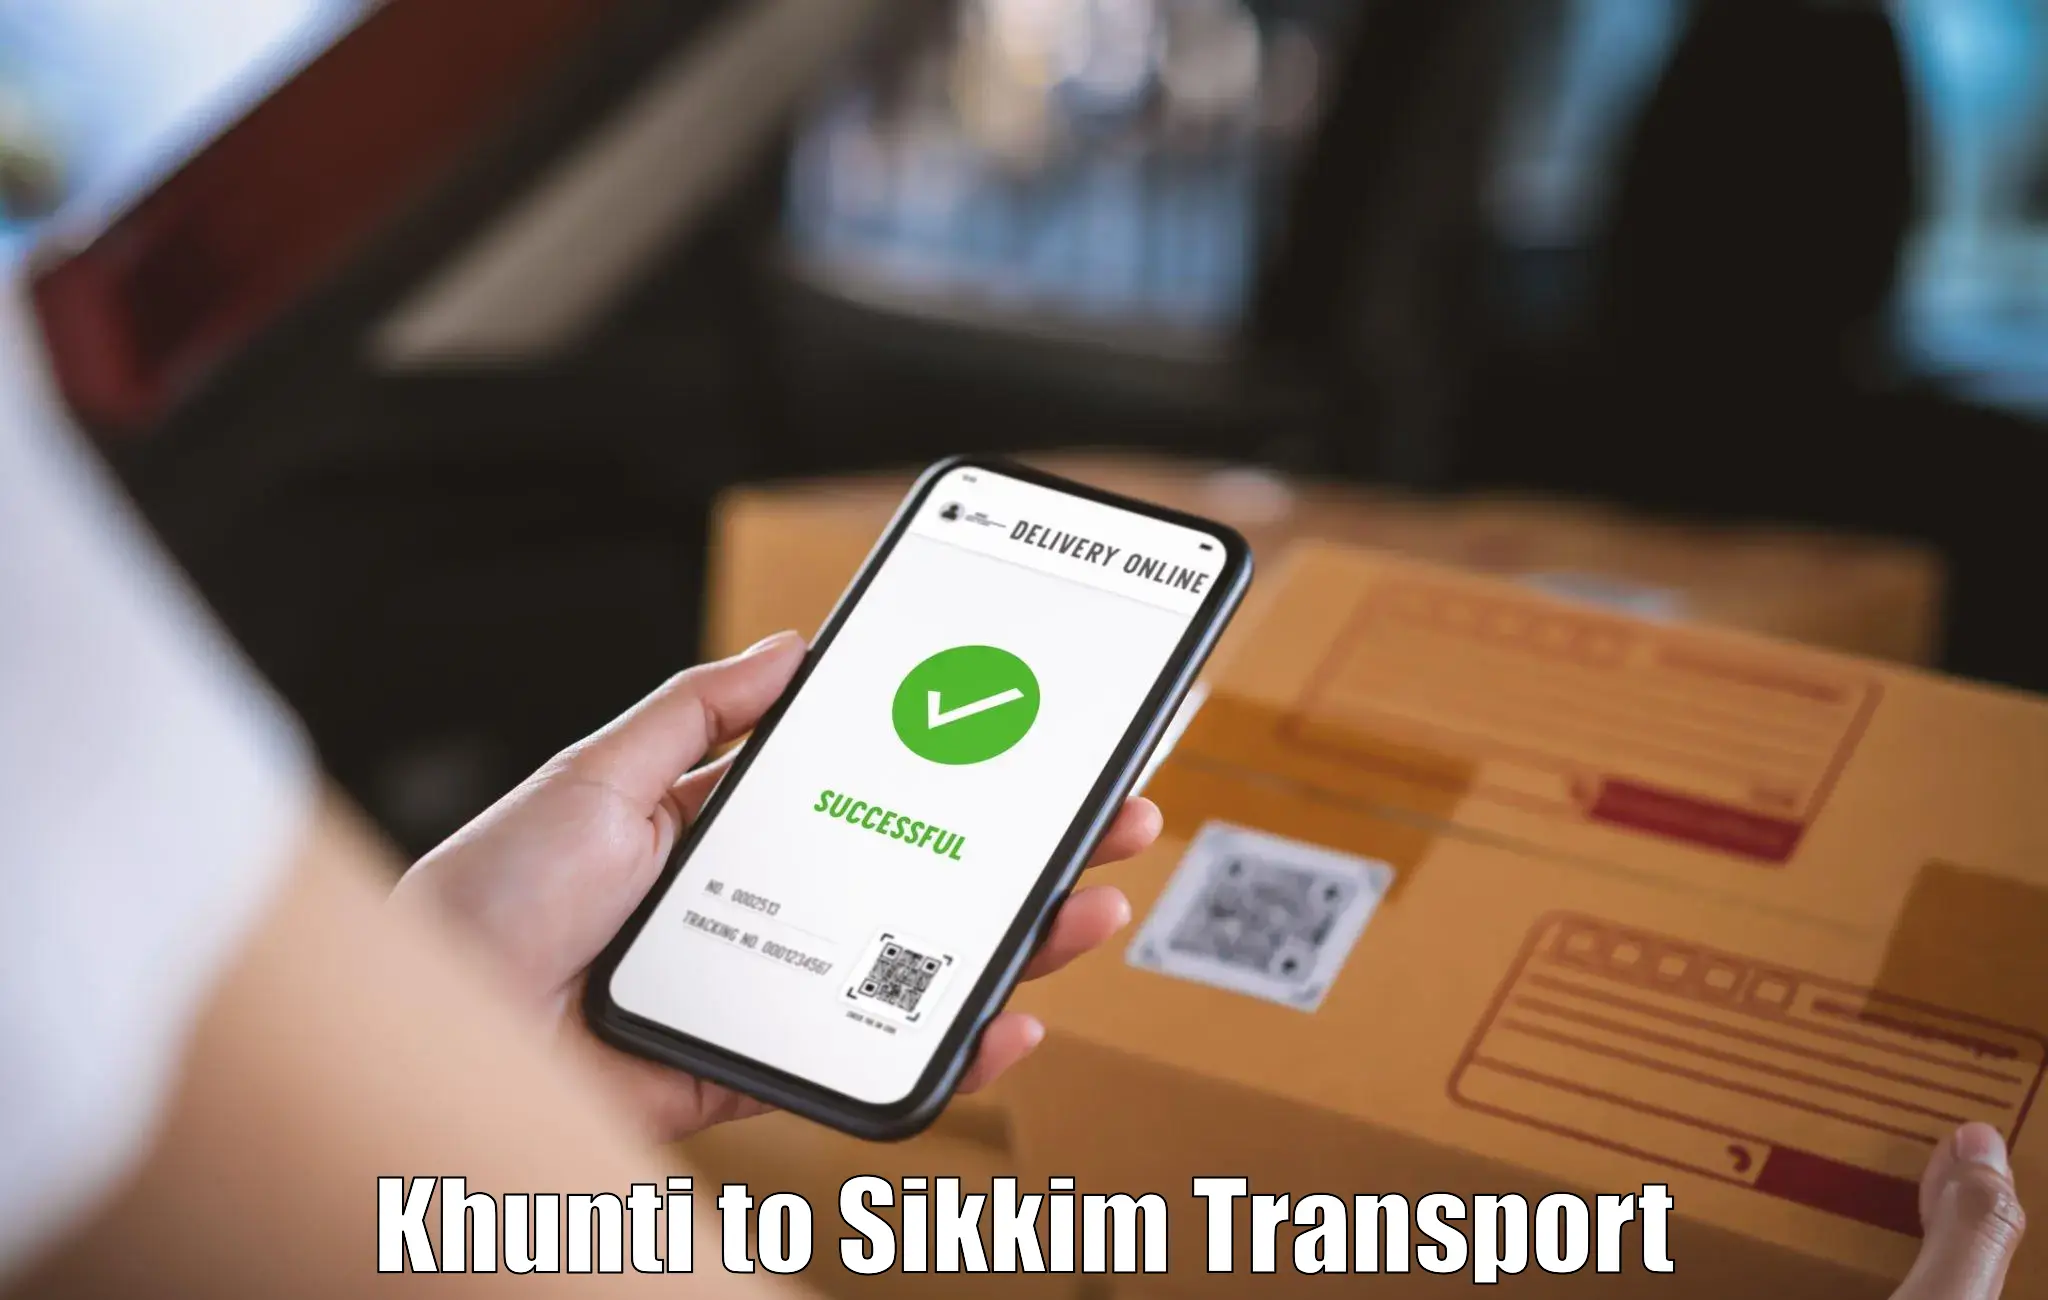 Transport in sharing Khunti to West Sikkim